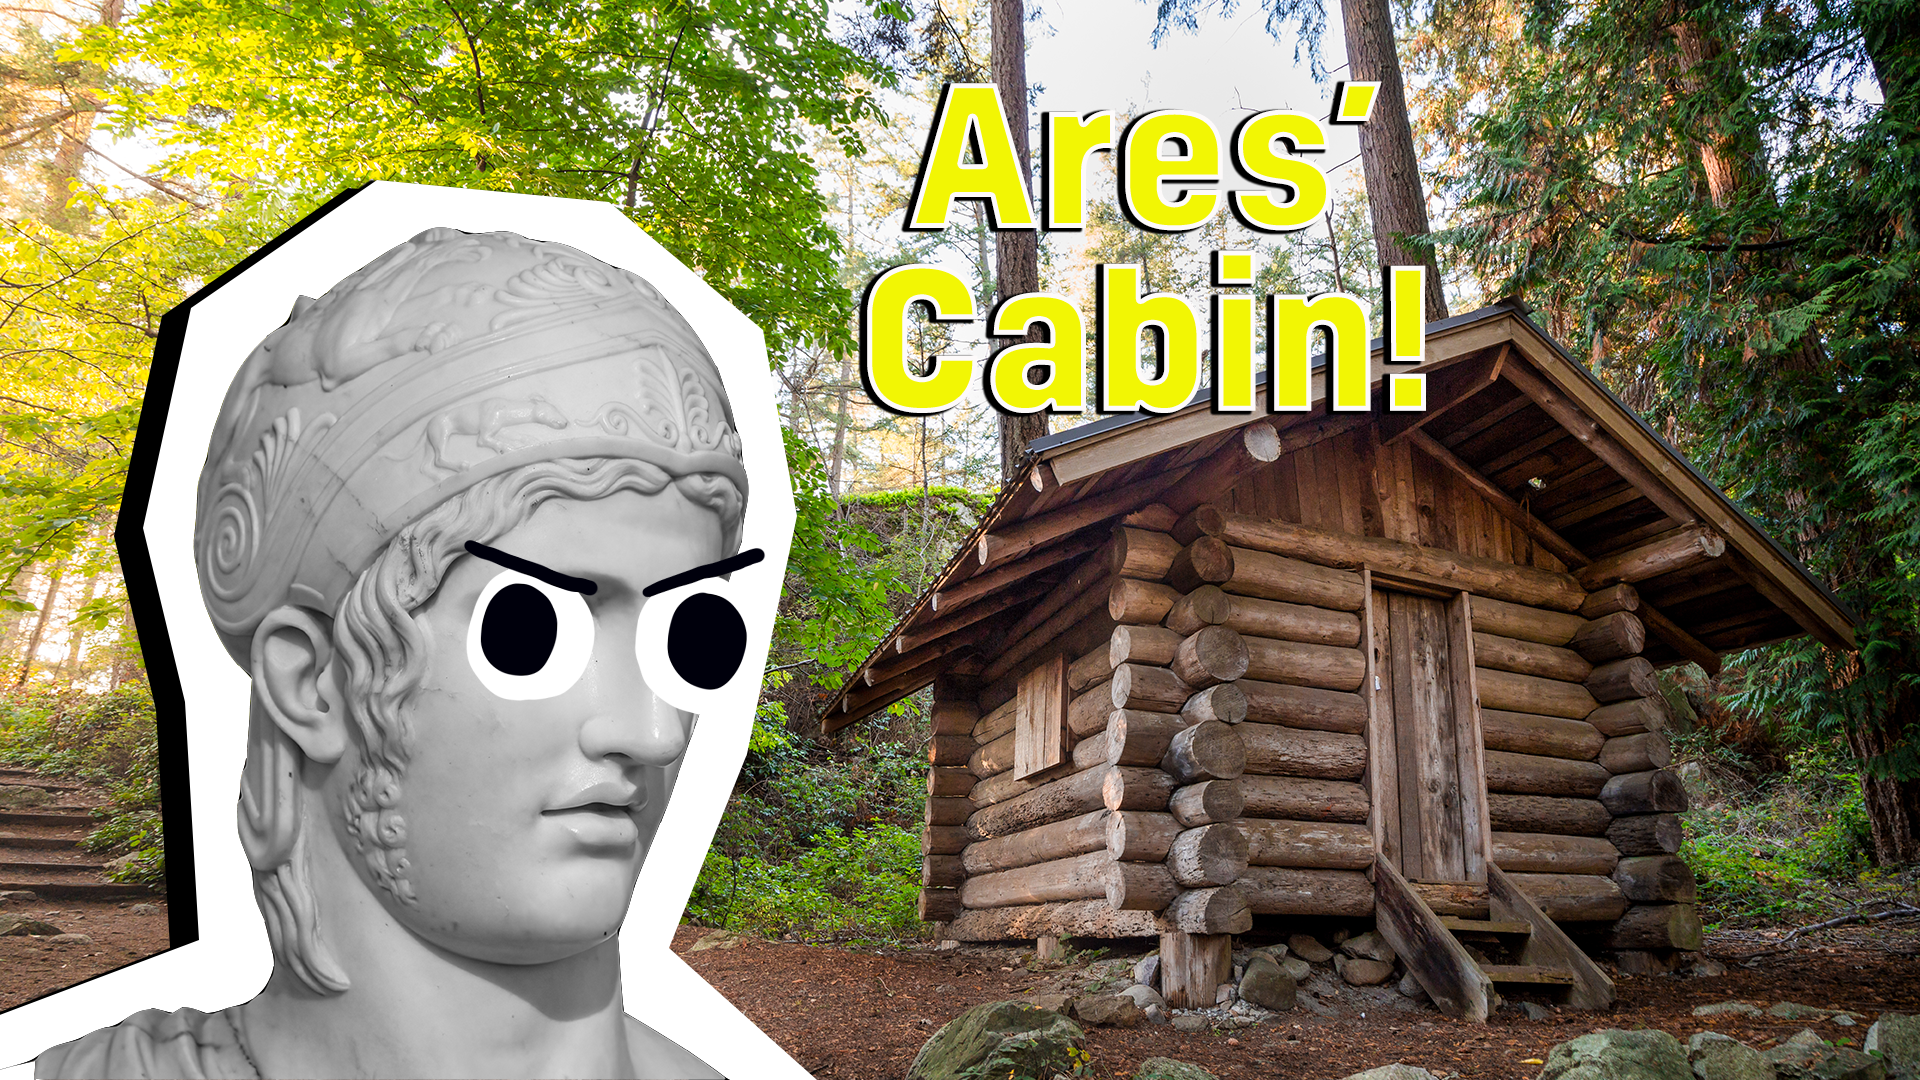 What Camp Half-Blood Cabin Do You Belong In?